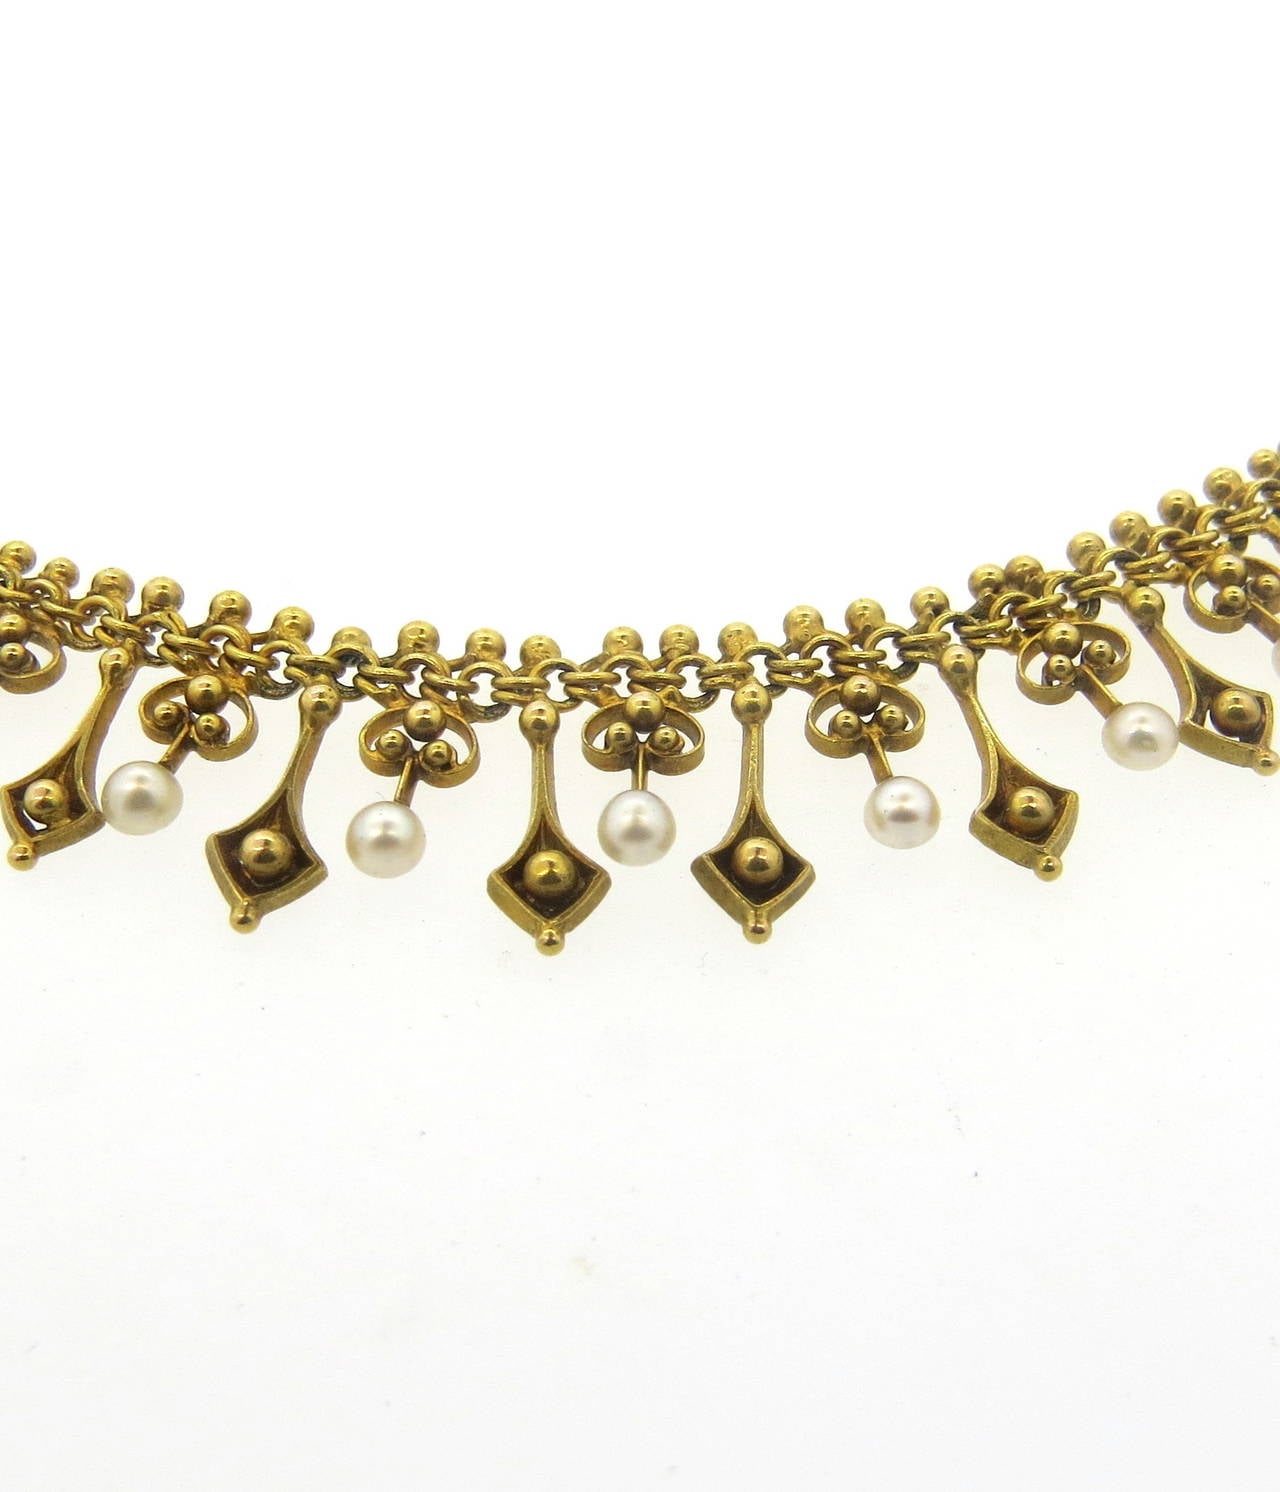 A 14k yellow gold necklace set with natural pearls 2.5mm in diameter.  The necklace is 15.5